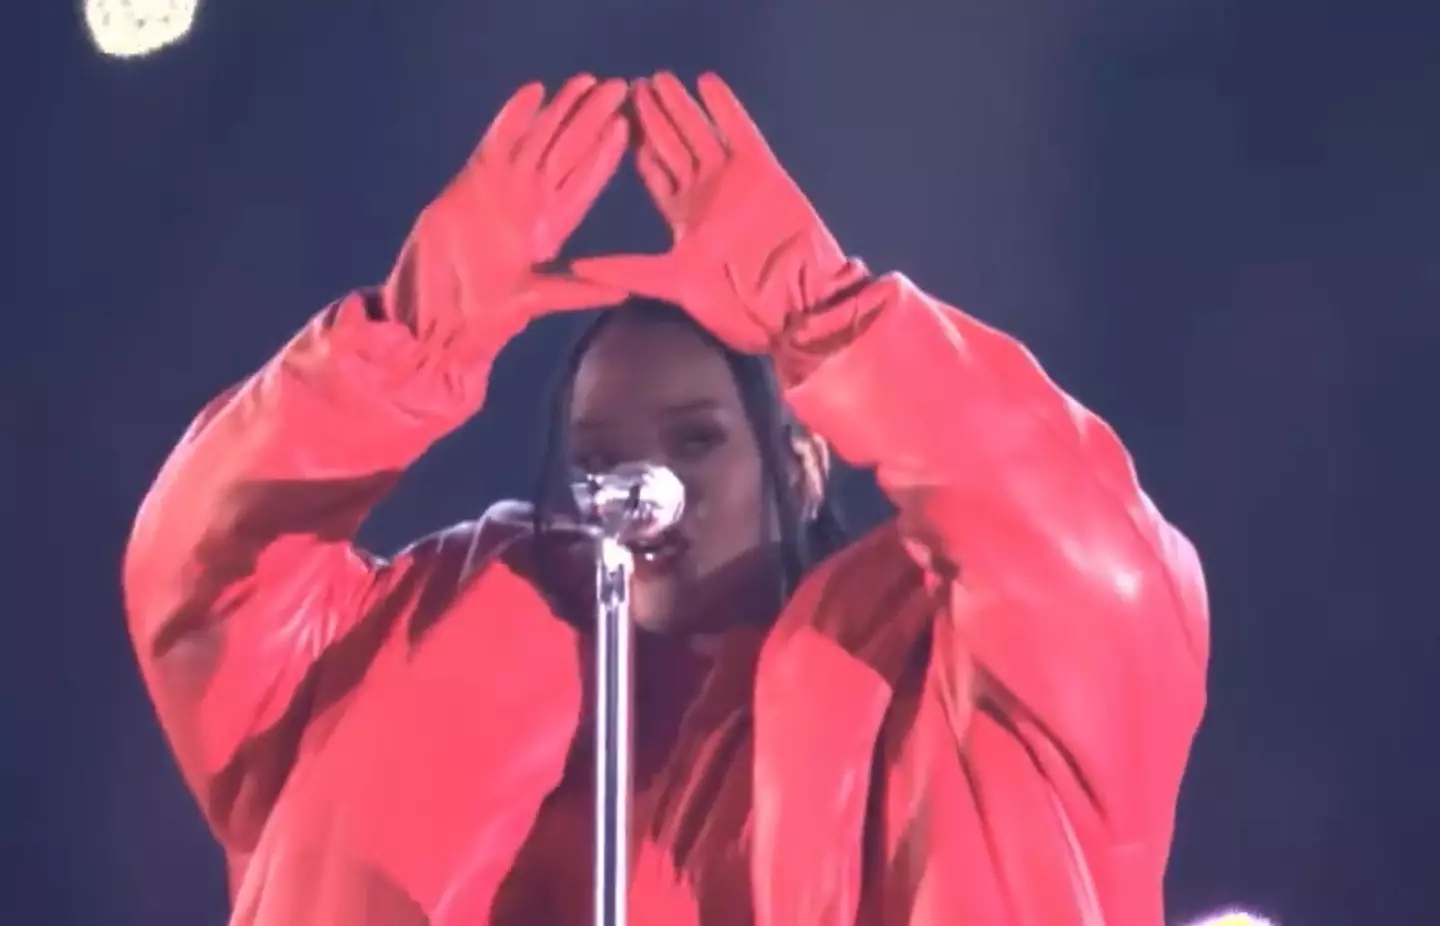 Illuminati confirmed, please ignore that she just sung the words 'diamonds in the sky' right before doing this.